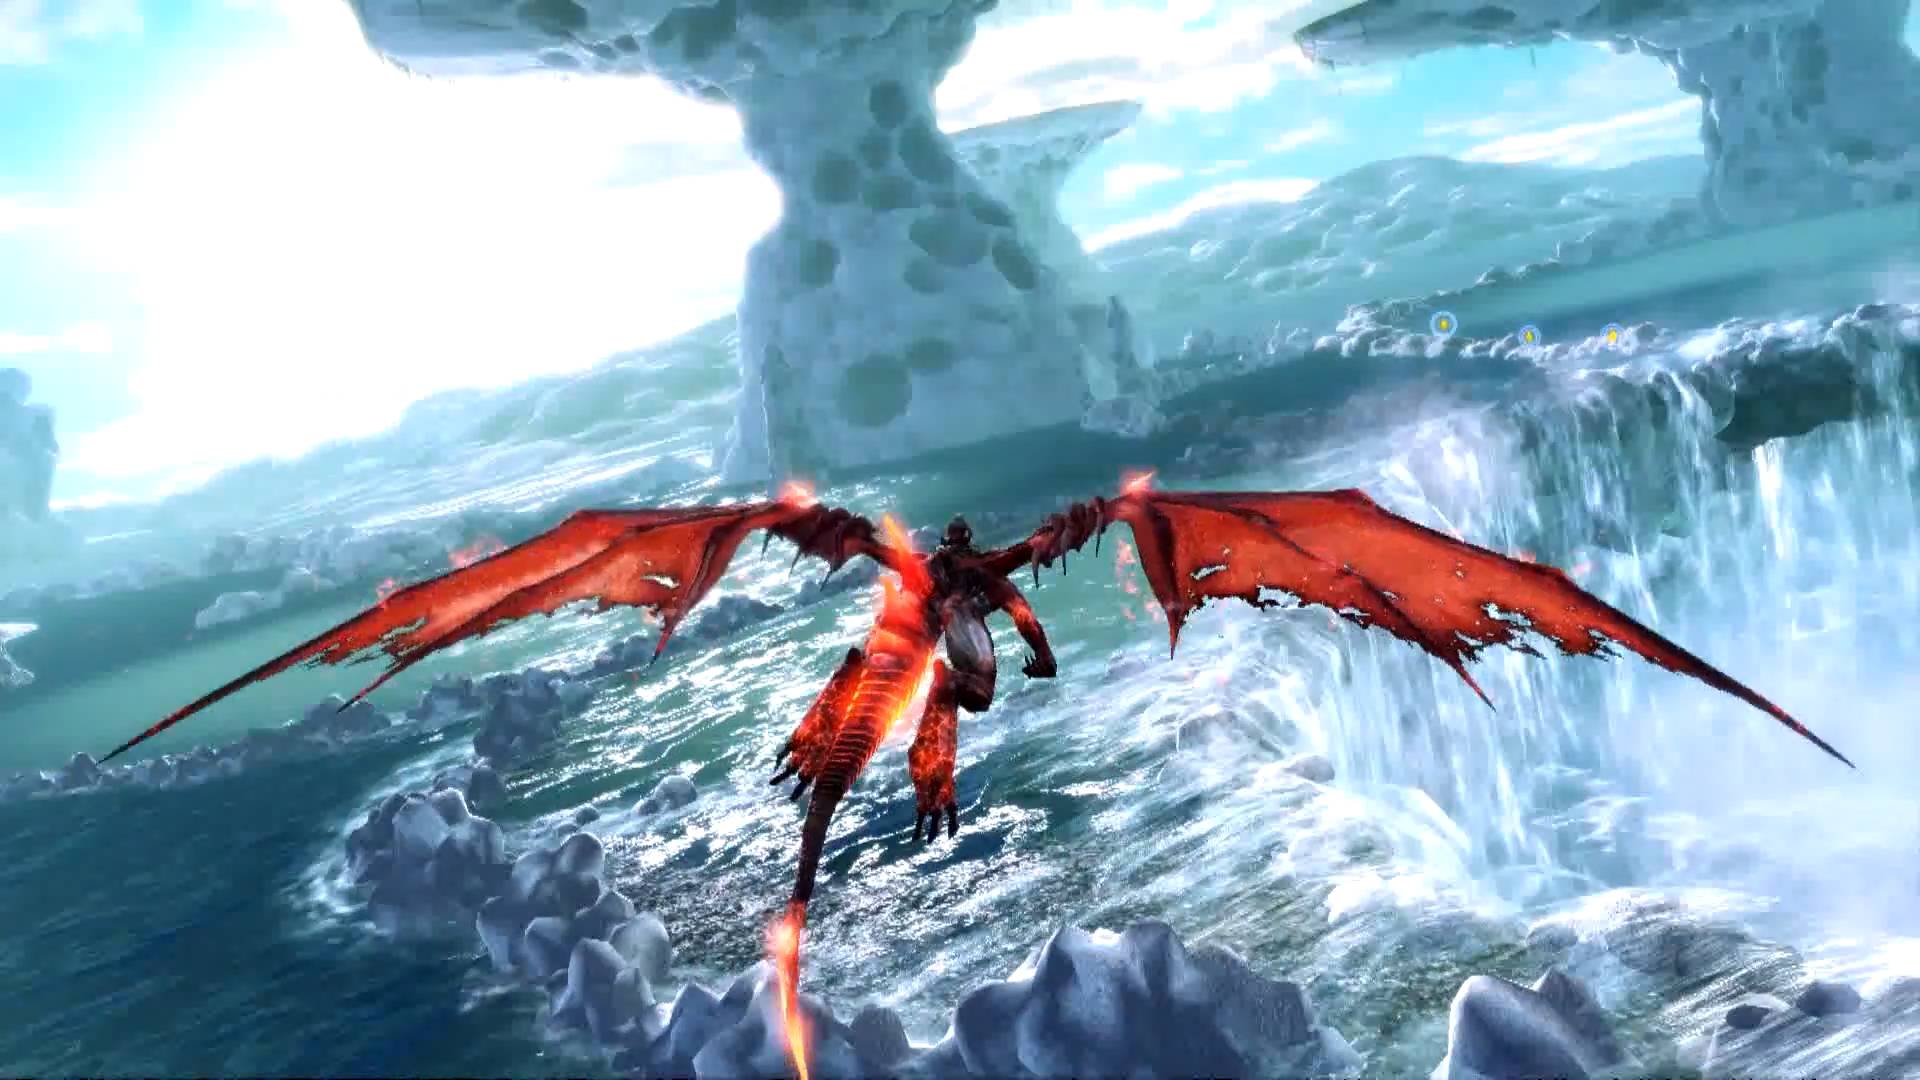 Some of Crimson Dragon's environments are truly breathtaking.